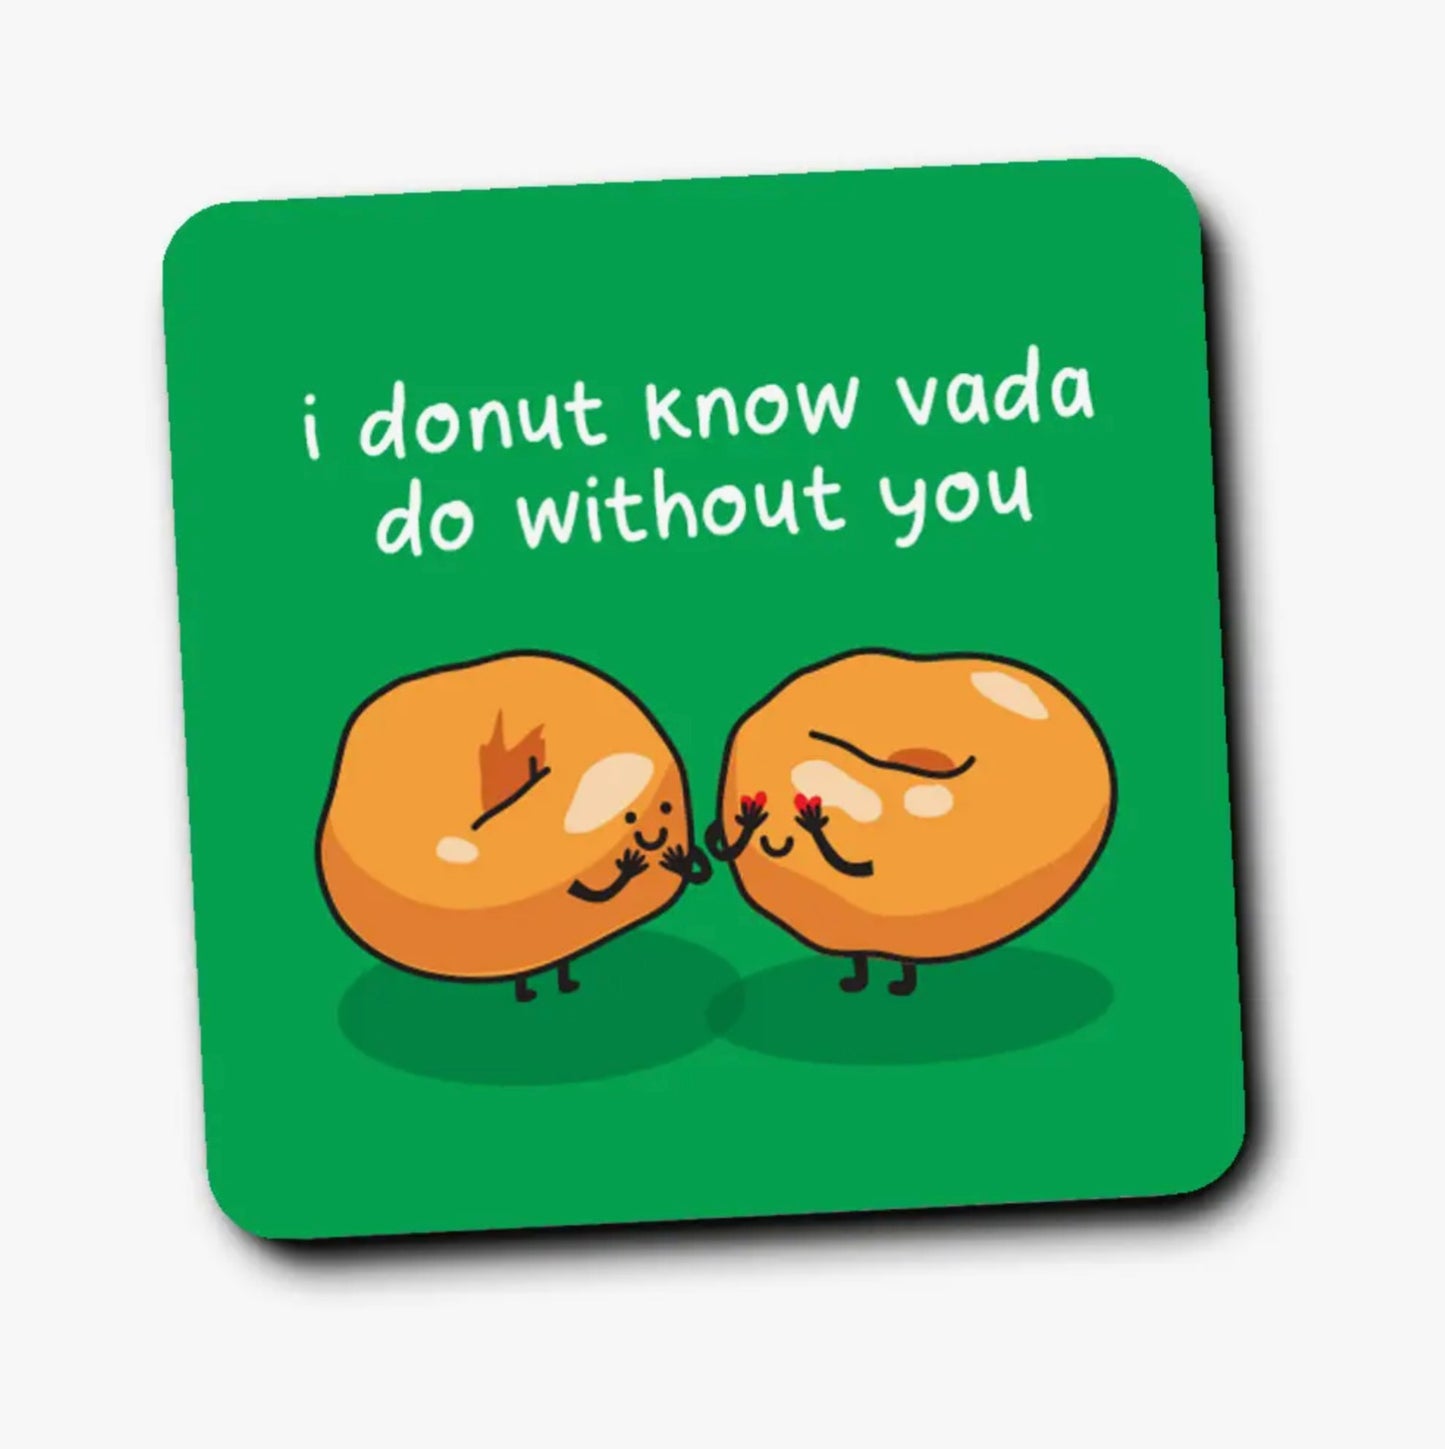 I Donut Know Vada Do Without You Coaster